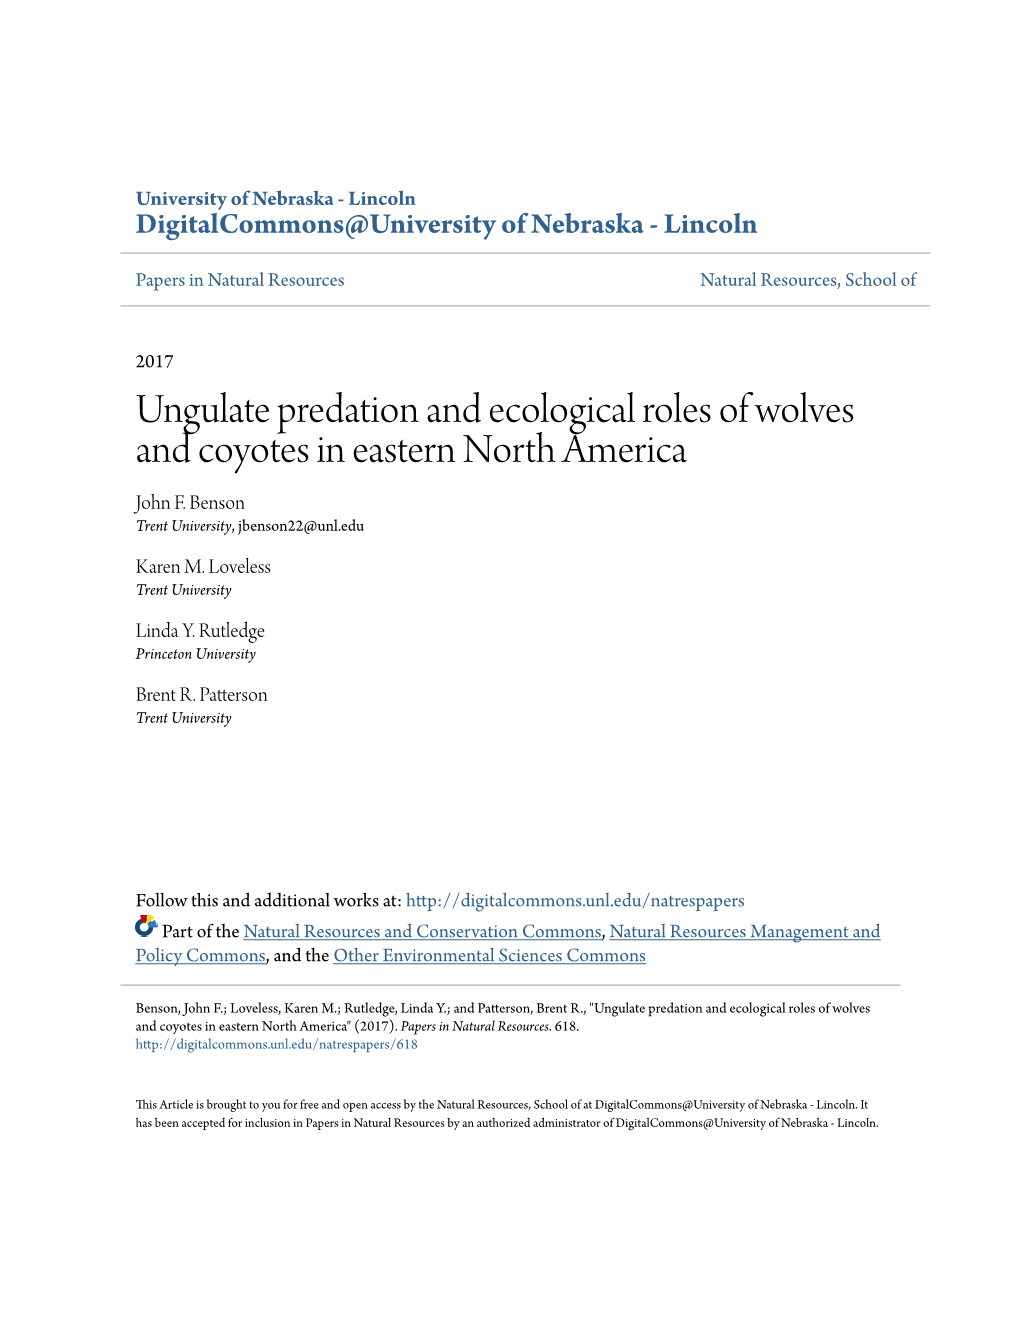 Ungulate Predation and Ecological Roles of Wolves and Coyotes in Eastern North America John F